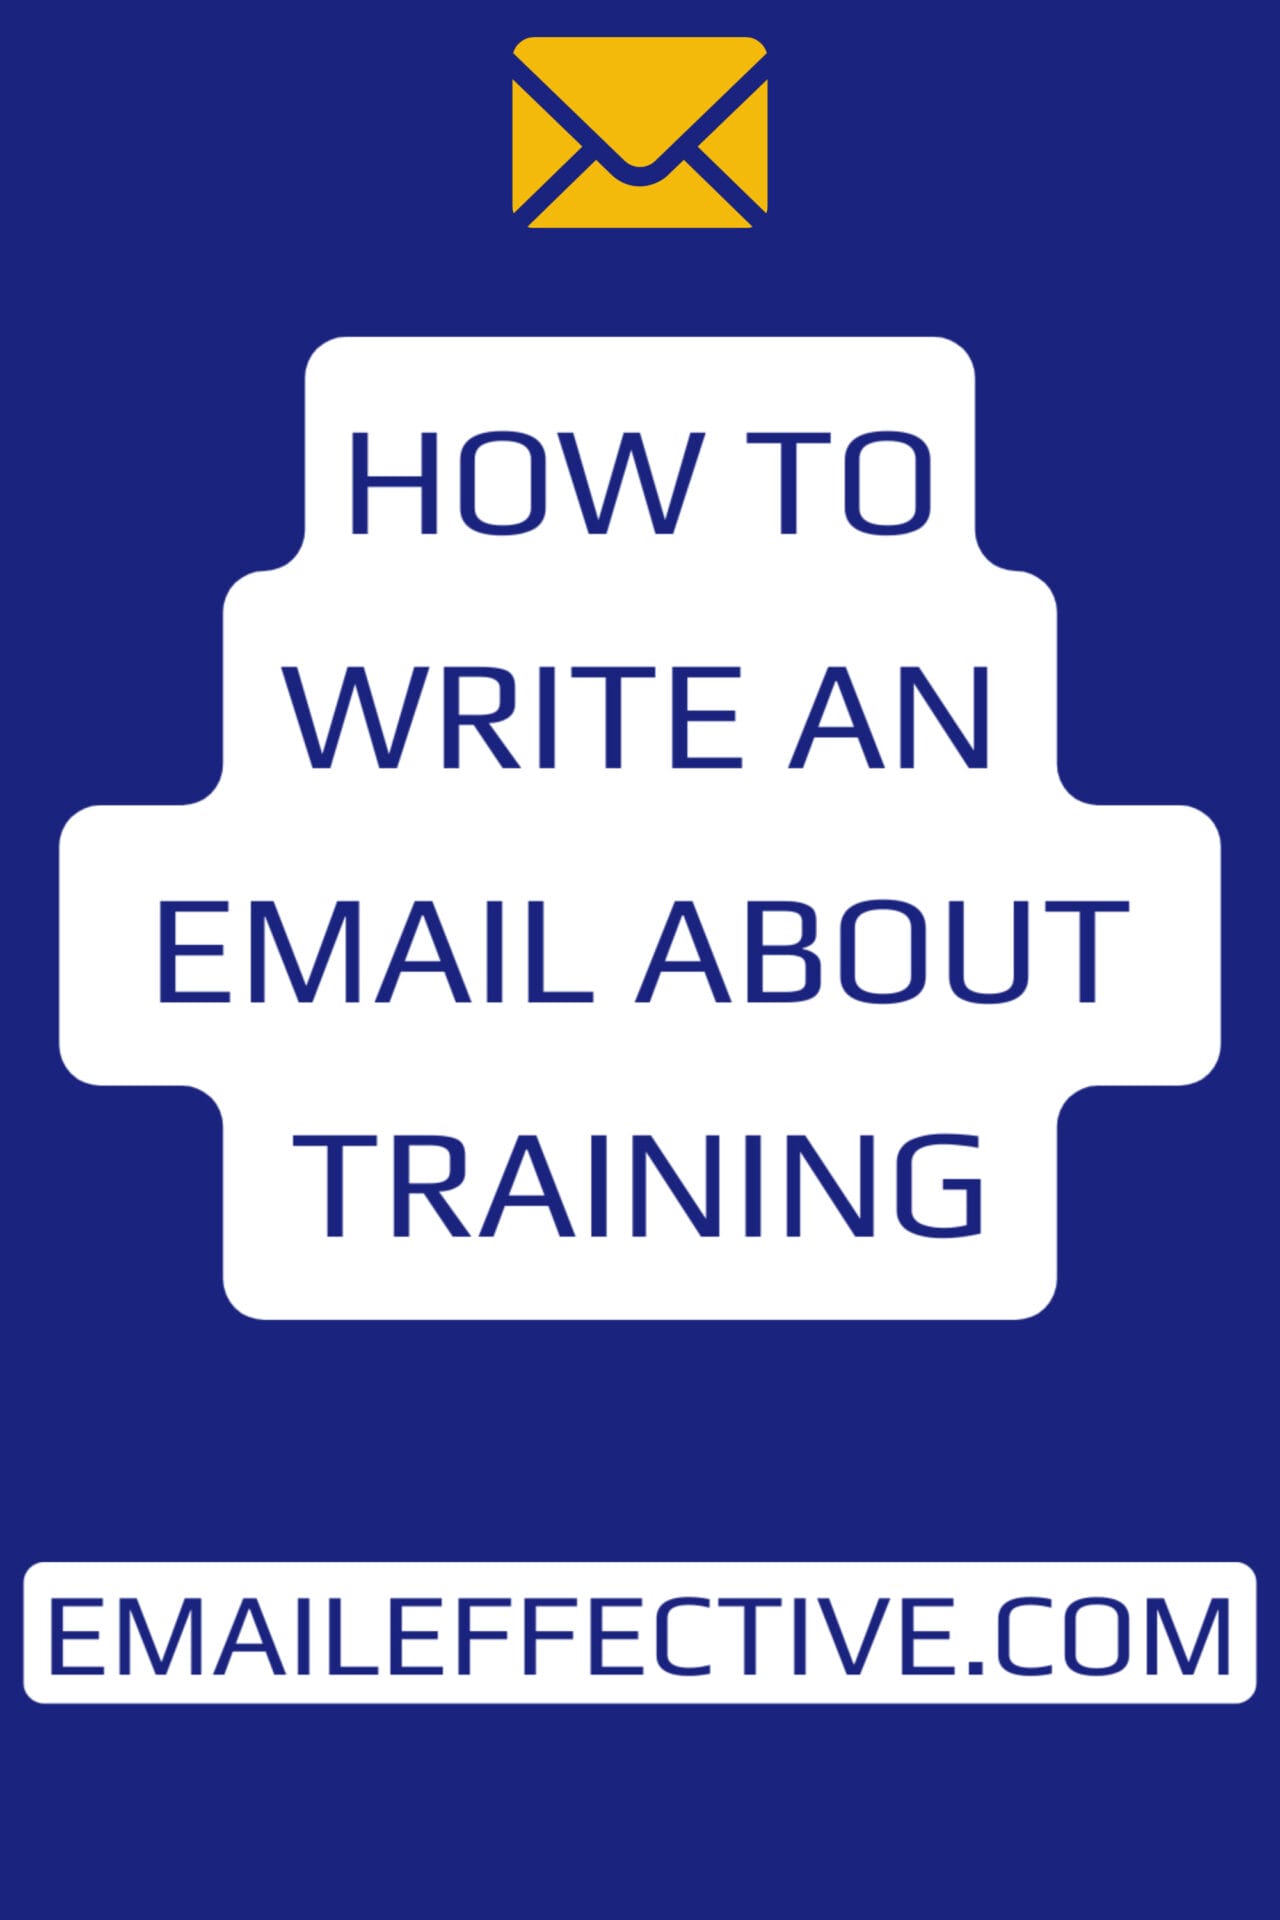 How to Write an Email about Training